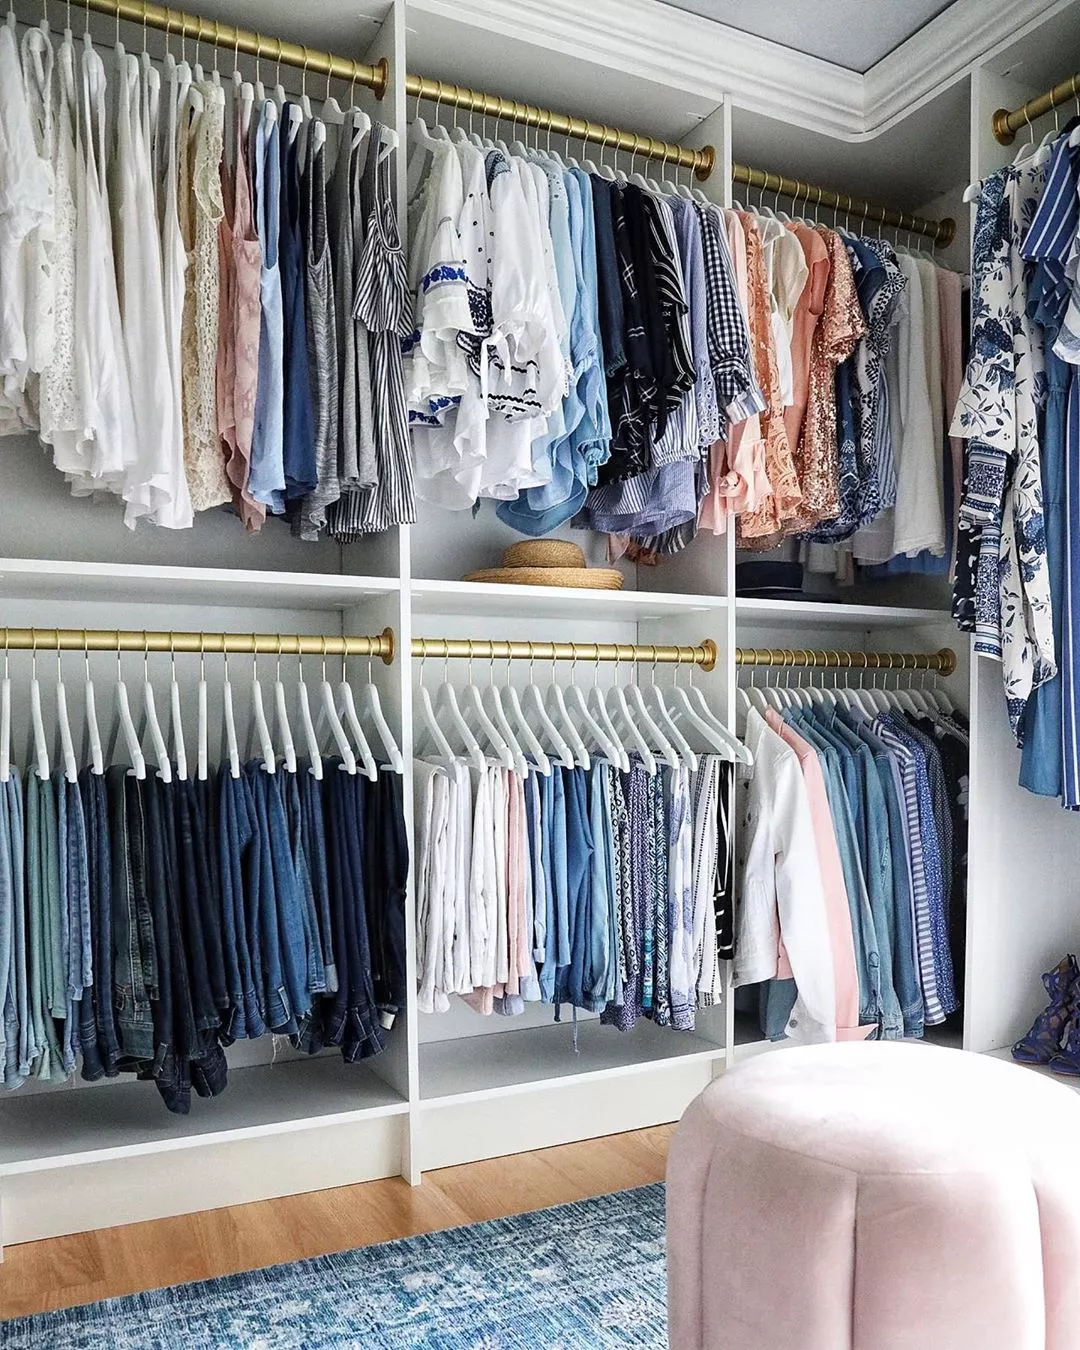 35+ Closet Organization Ideas for Making the Most of Your Space